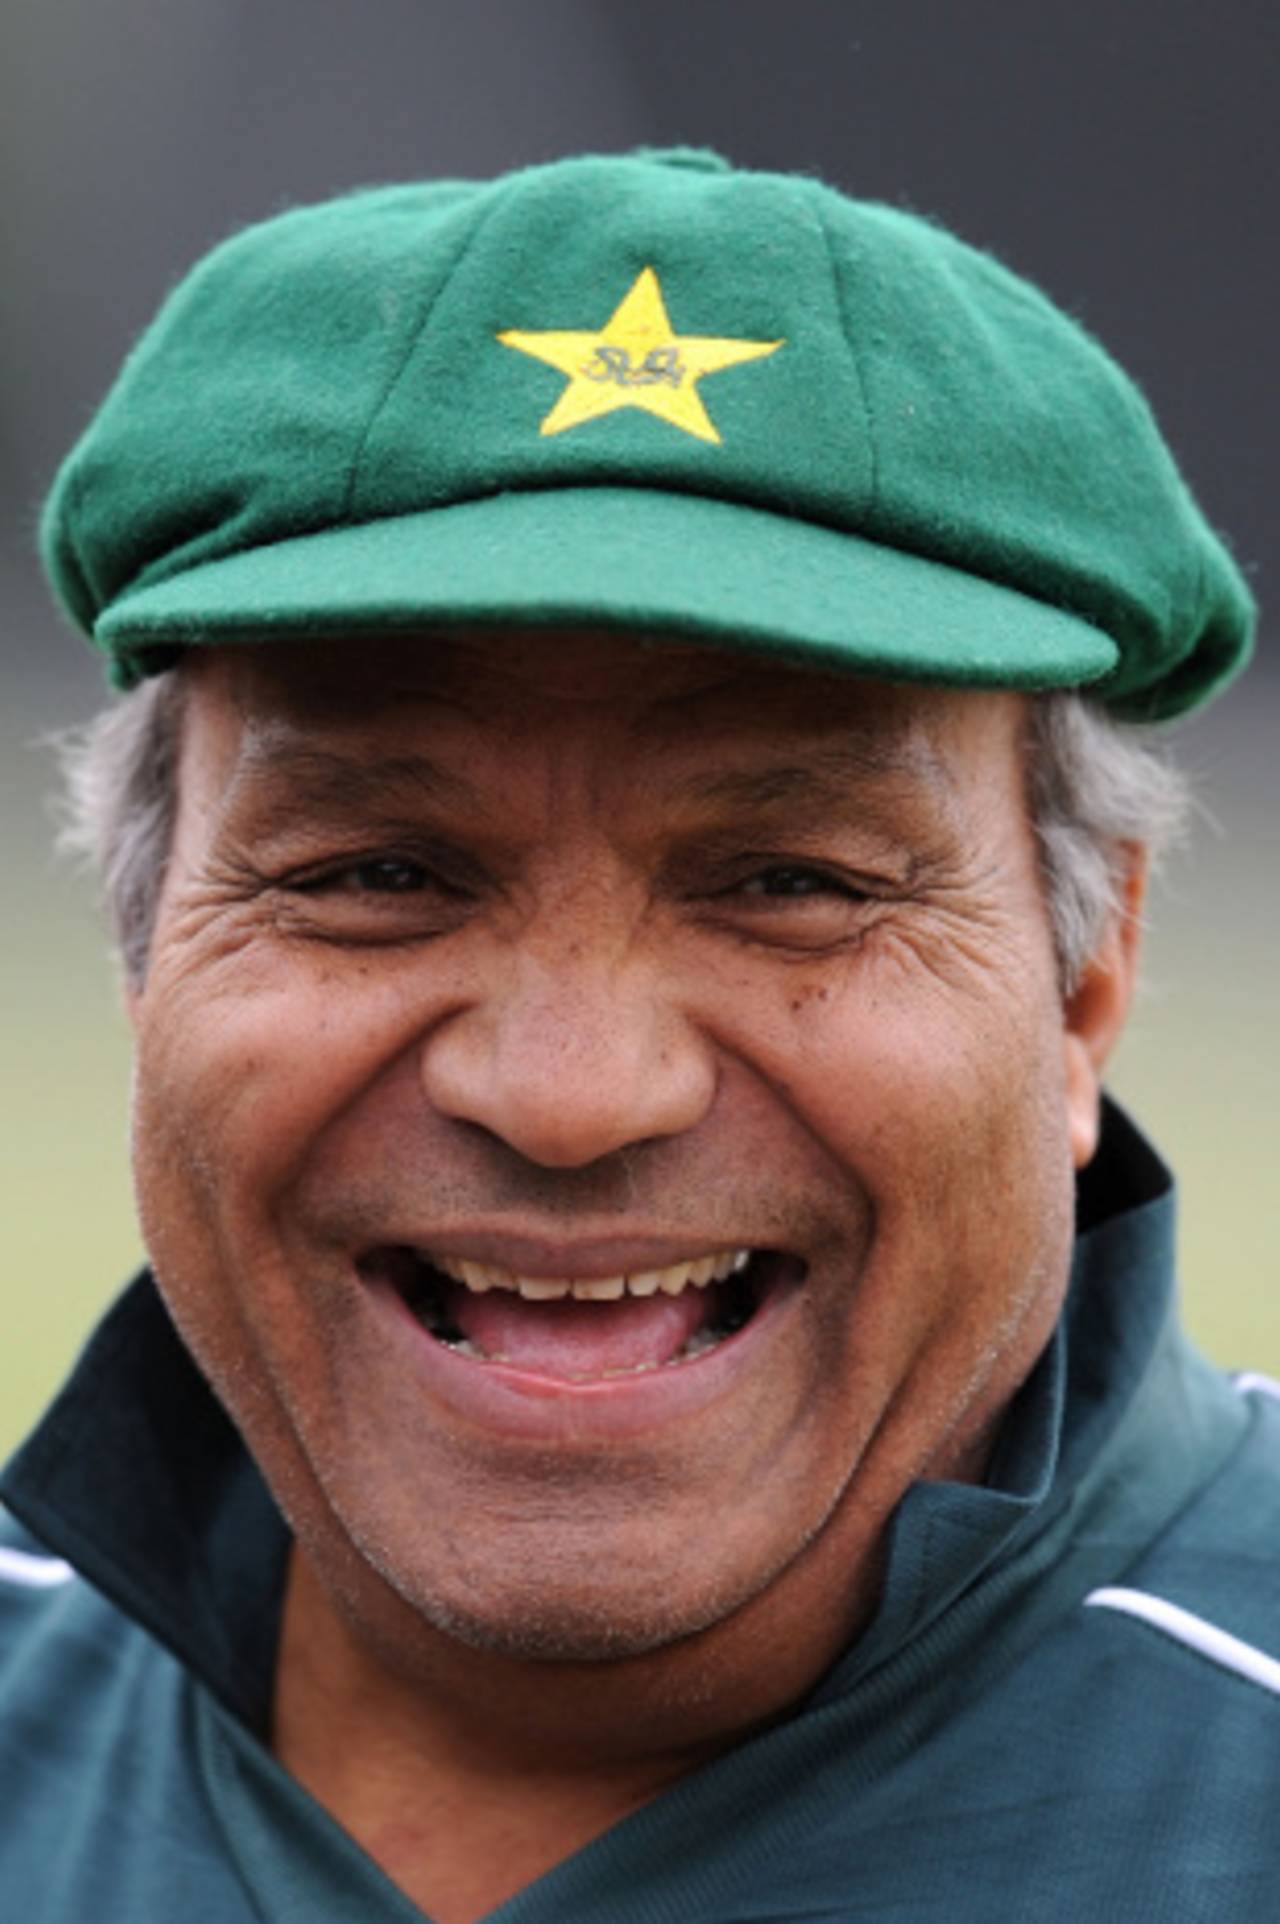 A cheerful Intikhab Alam looks on during a training session, London, June 5, 2009